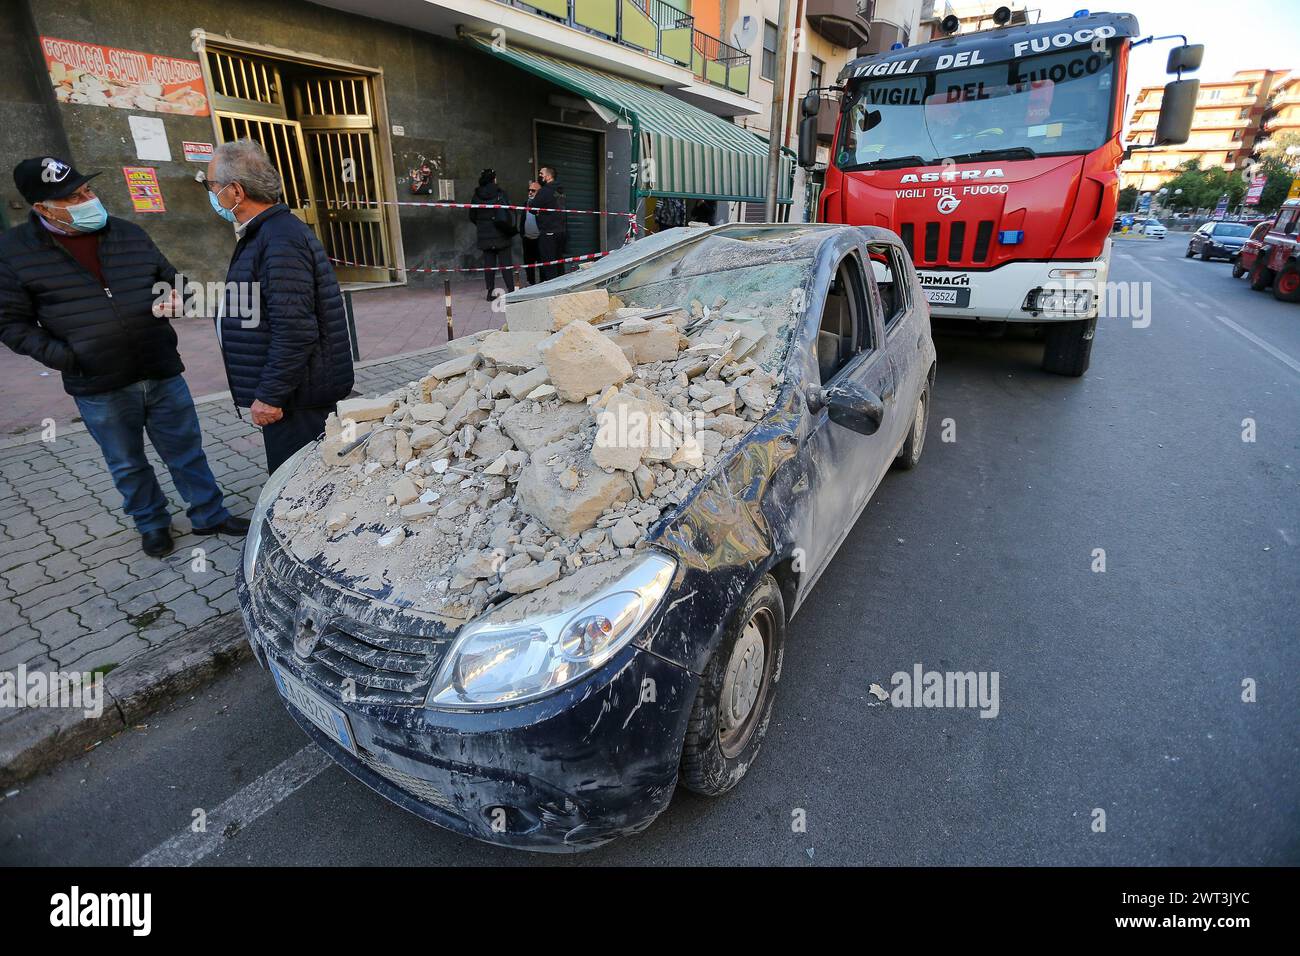 A car completely submerged by the rubble of the completely collapsed building in San Felice Cancello, in the province of Caserta, following an explosi Stock Photo